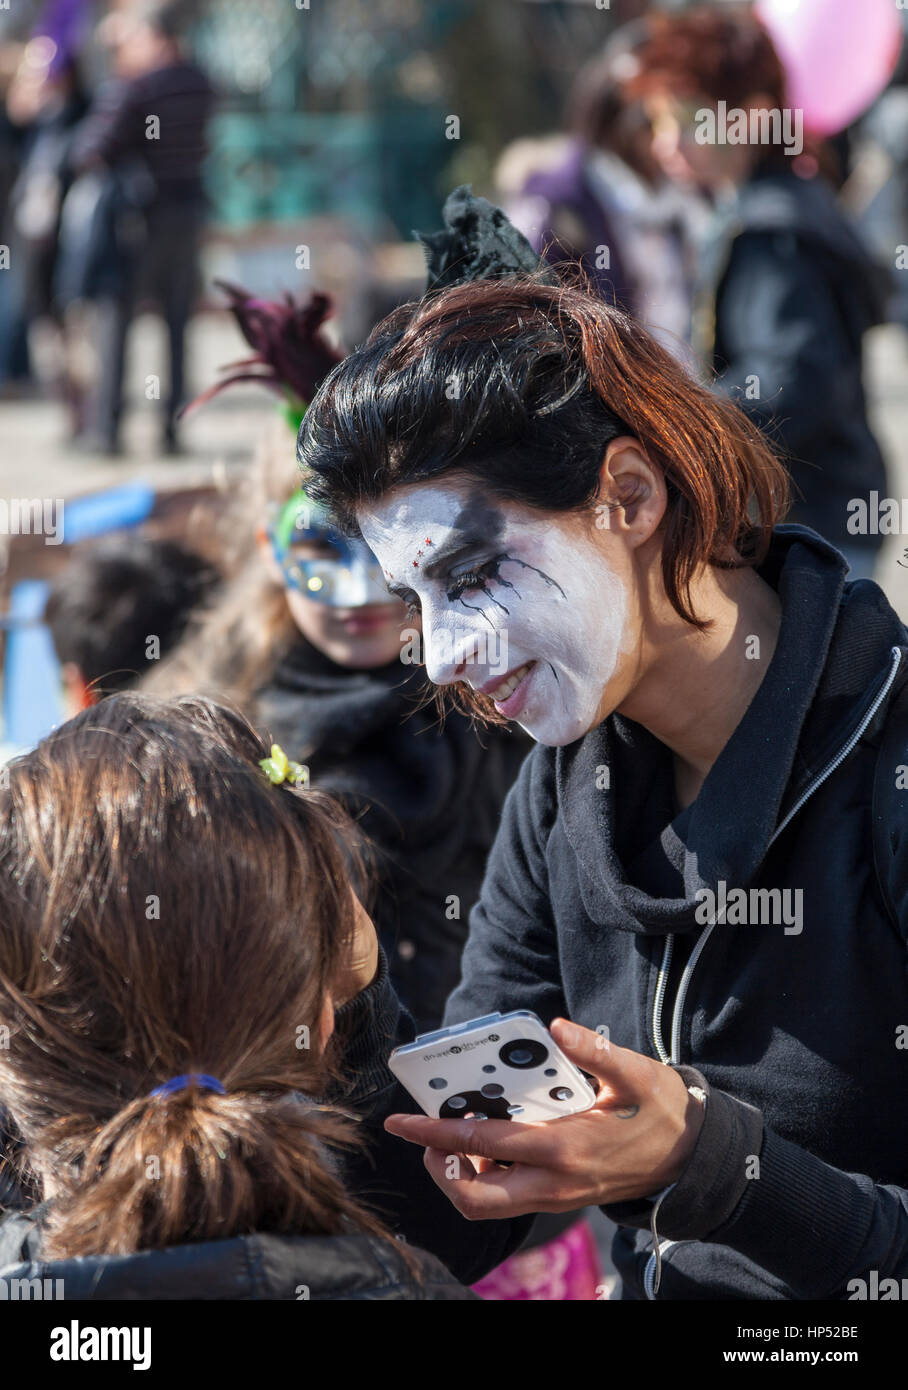 Venice,Italy-February 26, 2011: Environmental portrait of a female street face painter working on Sestiere Castello in Venice during the Venice carniv Stock Photo